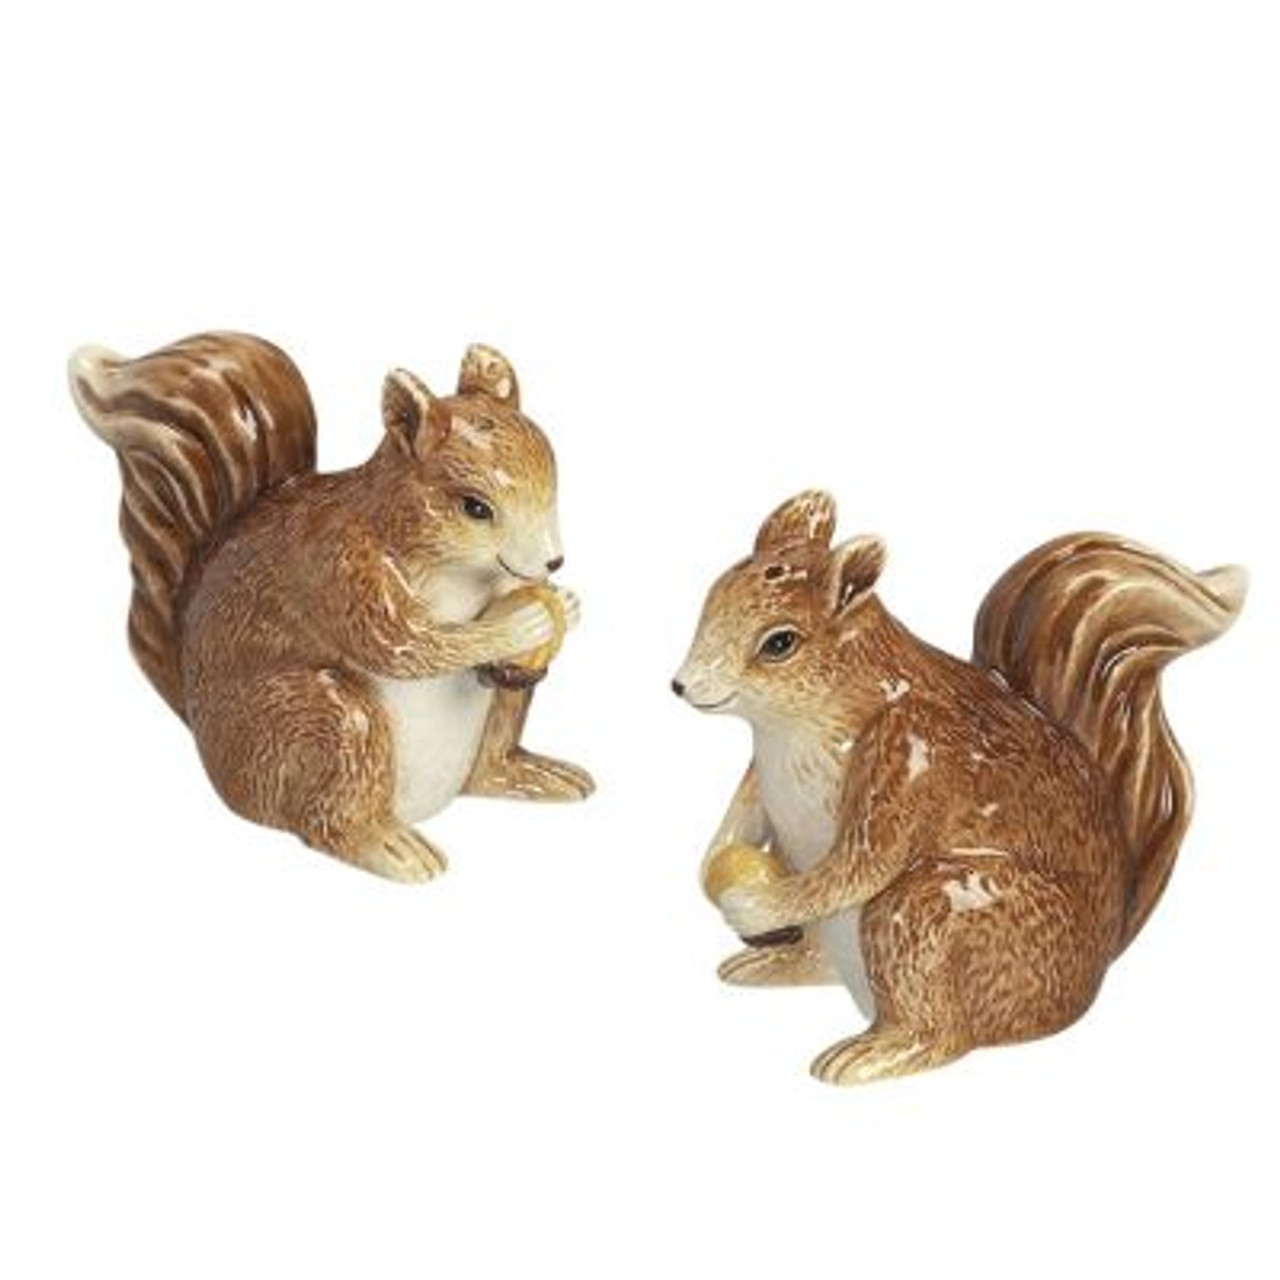 Cute Kitschy Salt & Pepper Shakers Wiggly Eye Squirrels, Turquoise